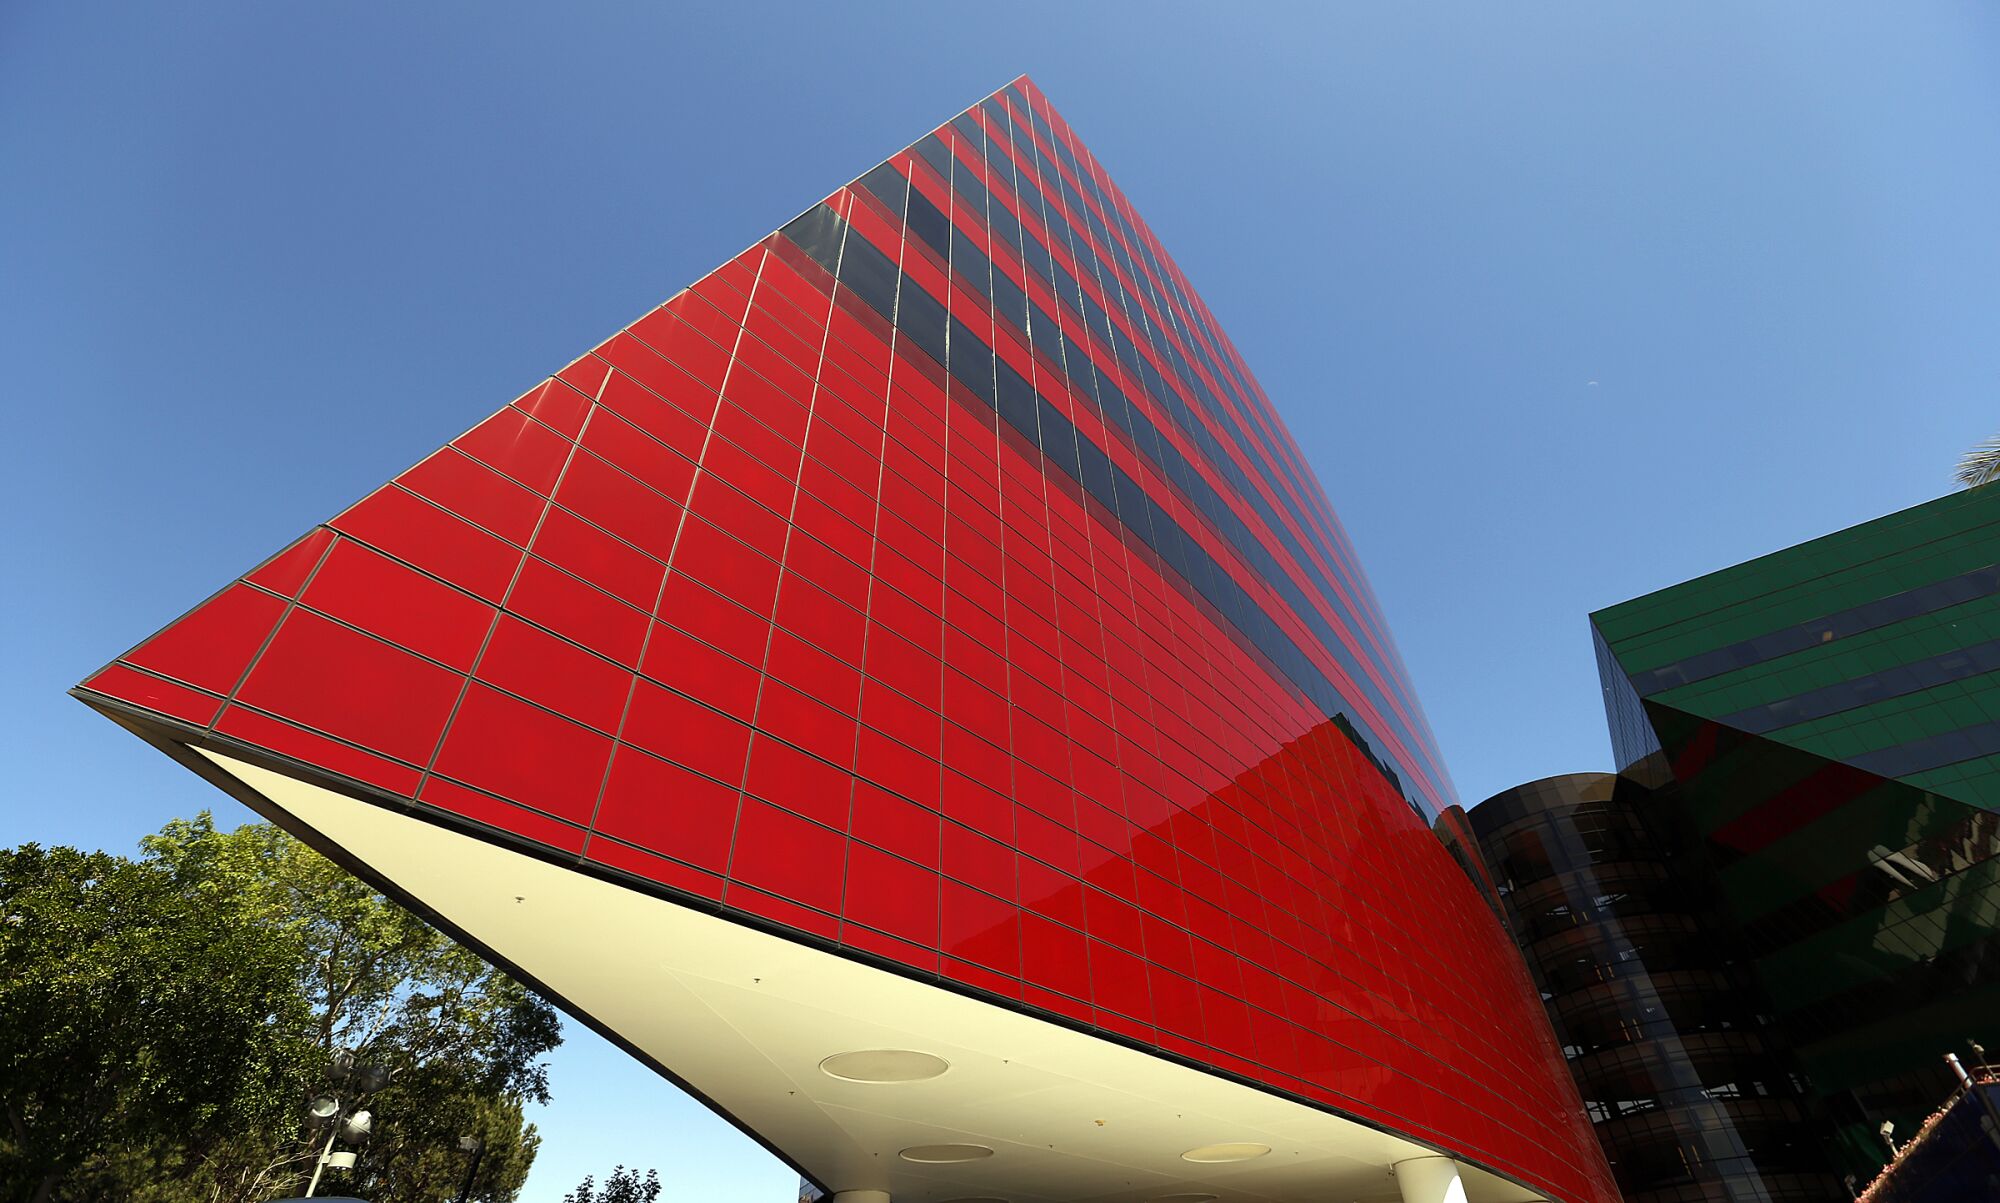 A photo shows a triangle-shaped part of a building that is red with black horizontal stripes.